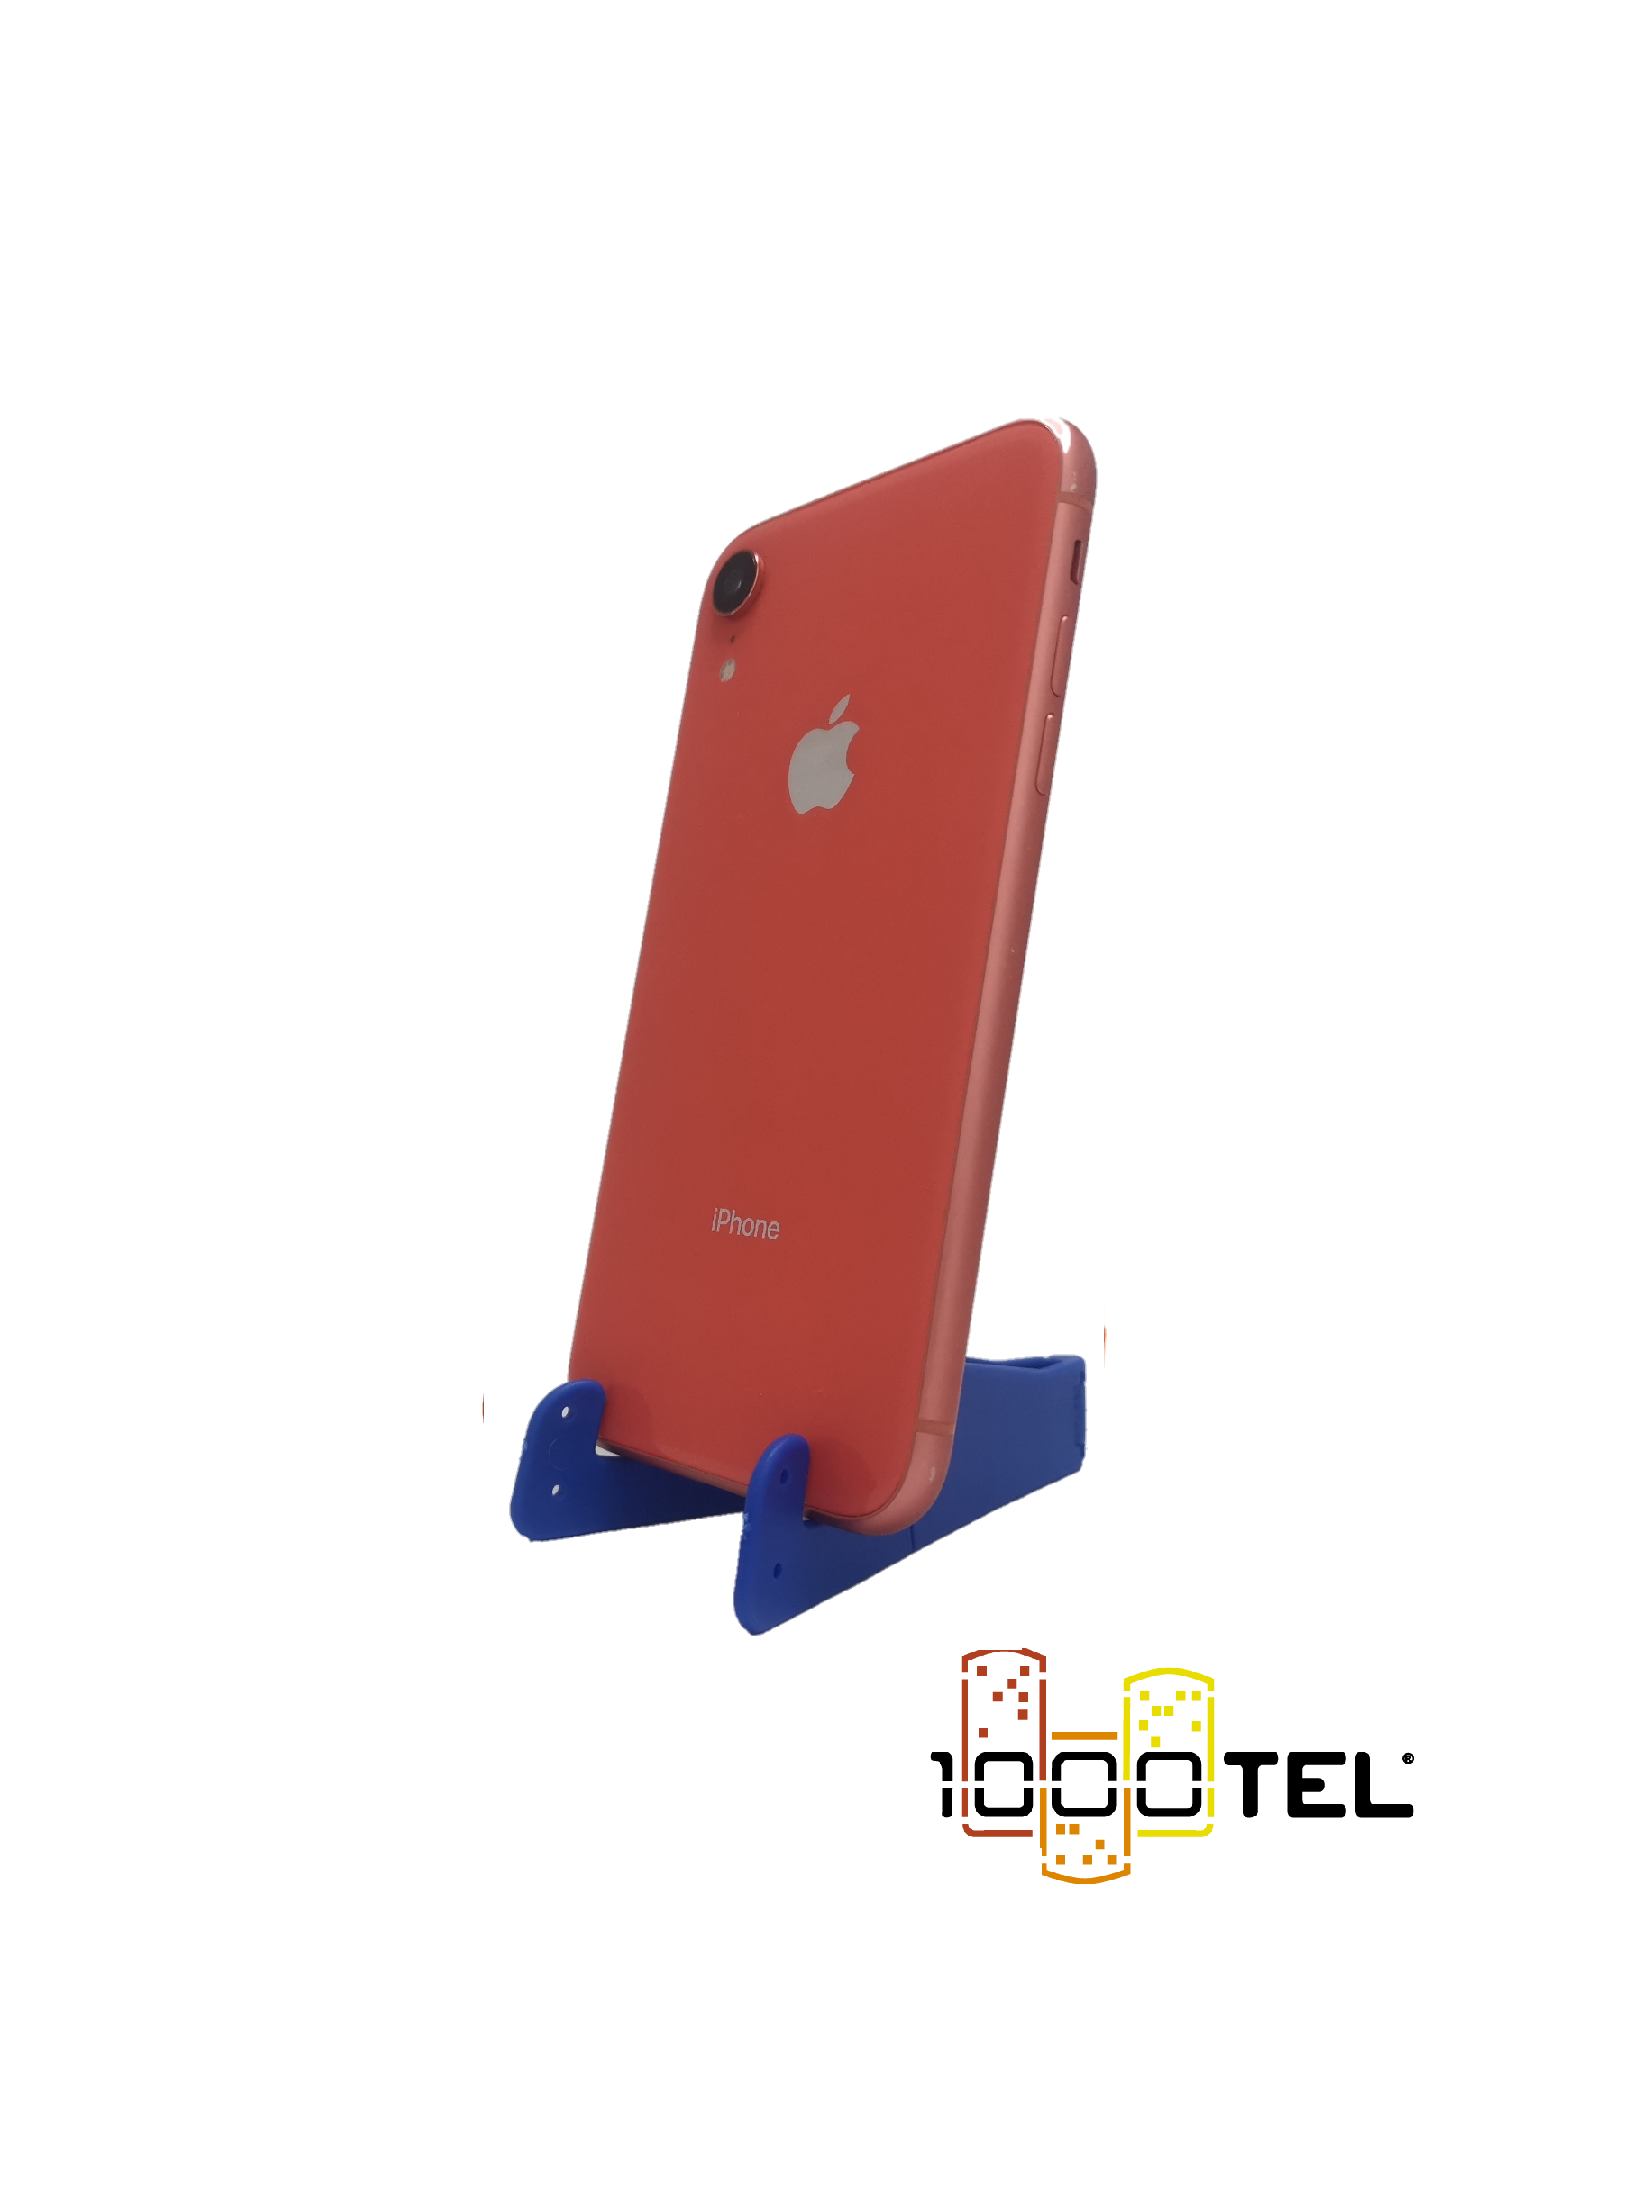 Iphone XR 64GB Coral #4